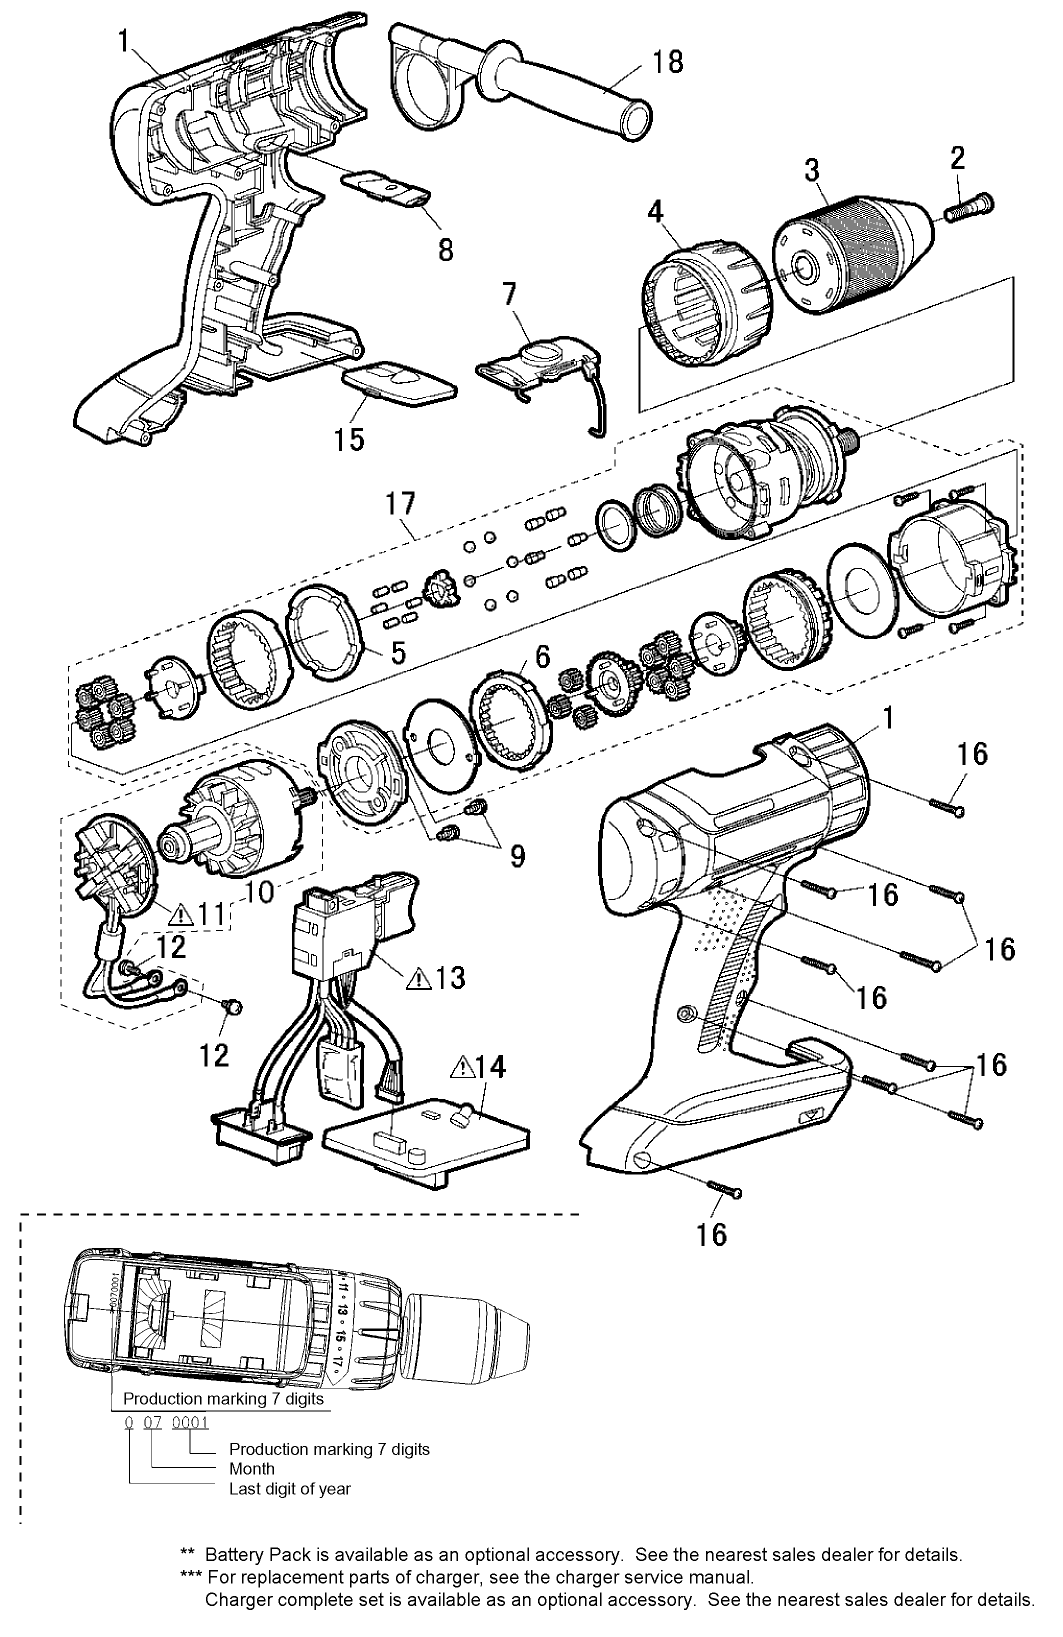 EY7950: Exploded View